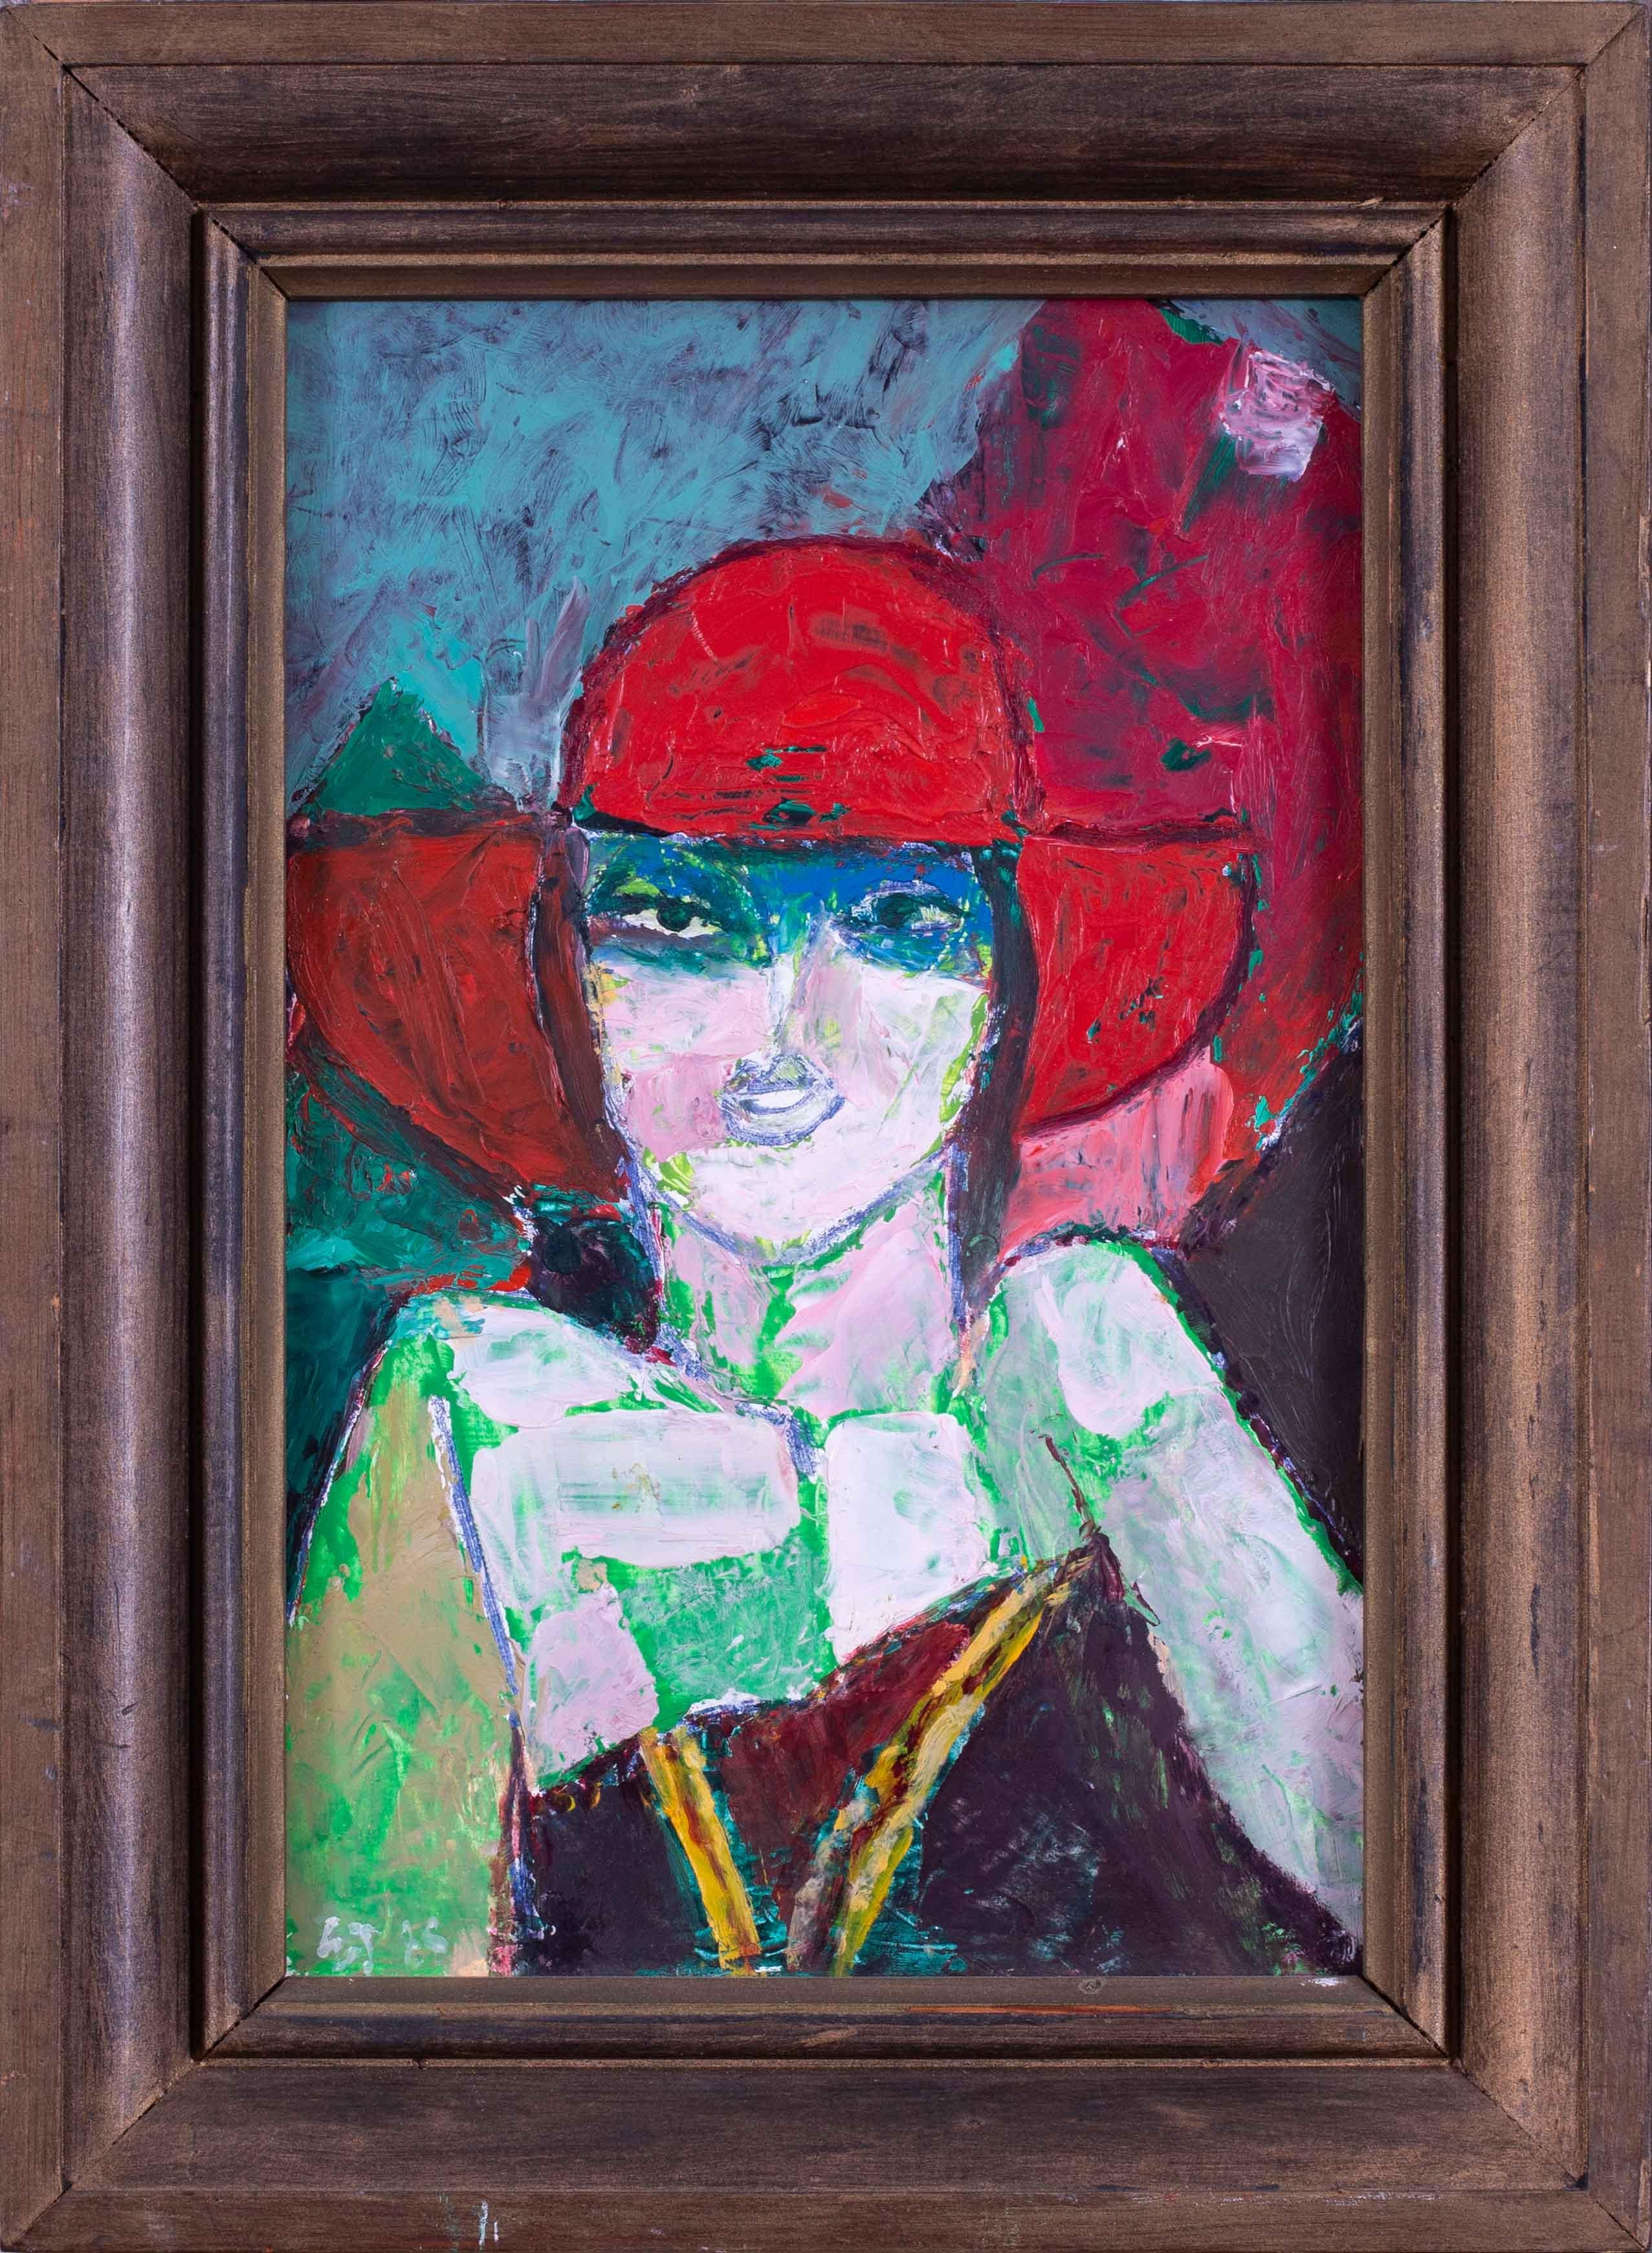 A striking portrait of a young woman, or girl, in a deep red hat. Her eyes seem to be in a blueish shade, giving her an air of mystery, as she searches out of the frame. 

Ewart Johns (British, 1923 – 2013)
Young Woman In A Red Hat
Oil on